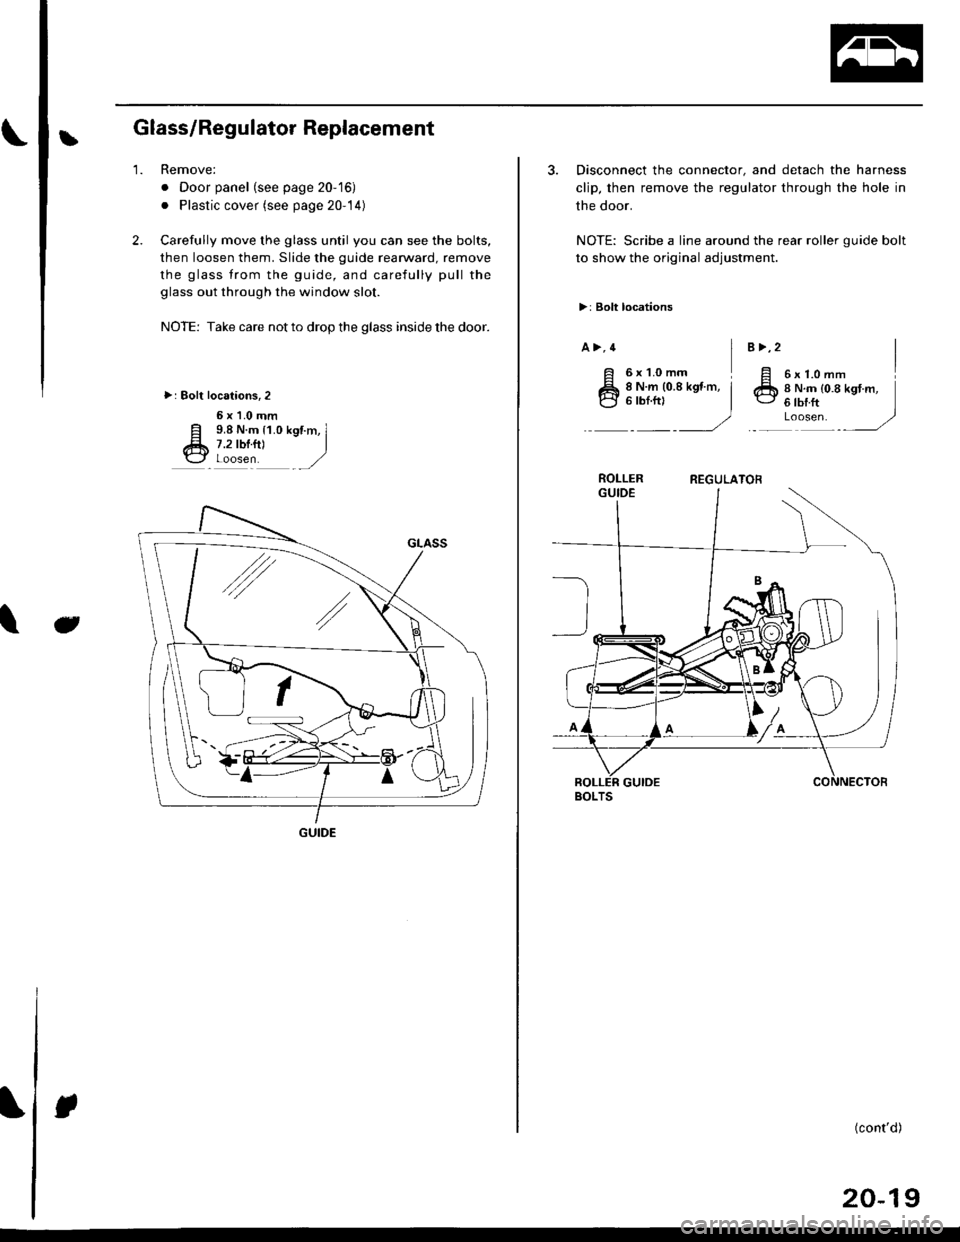 HONDA CIVIC 1996 6.G Workshop Manual LGlass/Regulator Replacement
2.
1.Remove:
. Door panel (see page 20-16)
. Plastic cover (see page 20-14)
Carefully move the glass until you can see the bolts,
then loosen them. Slide the guide rearwa